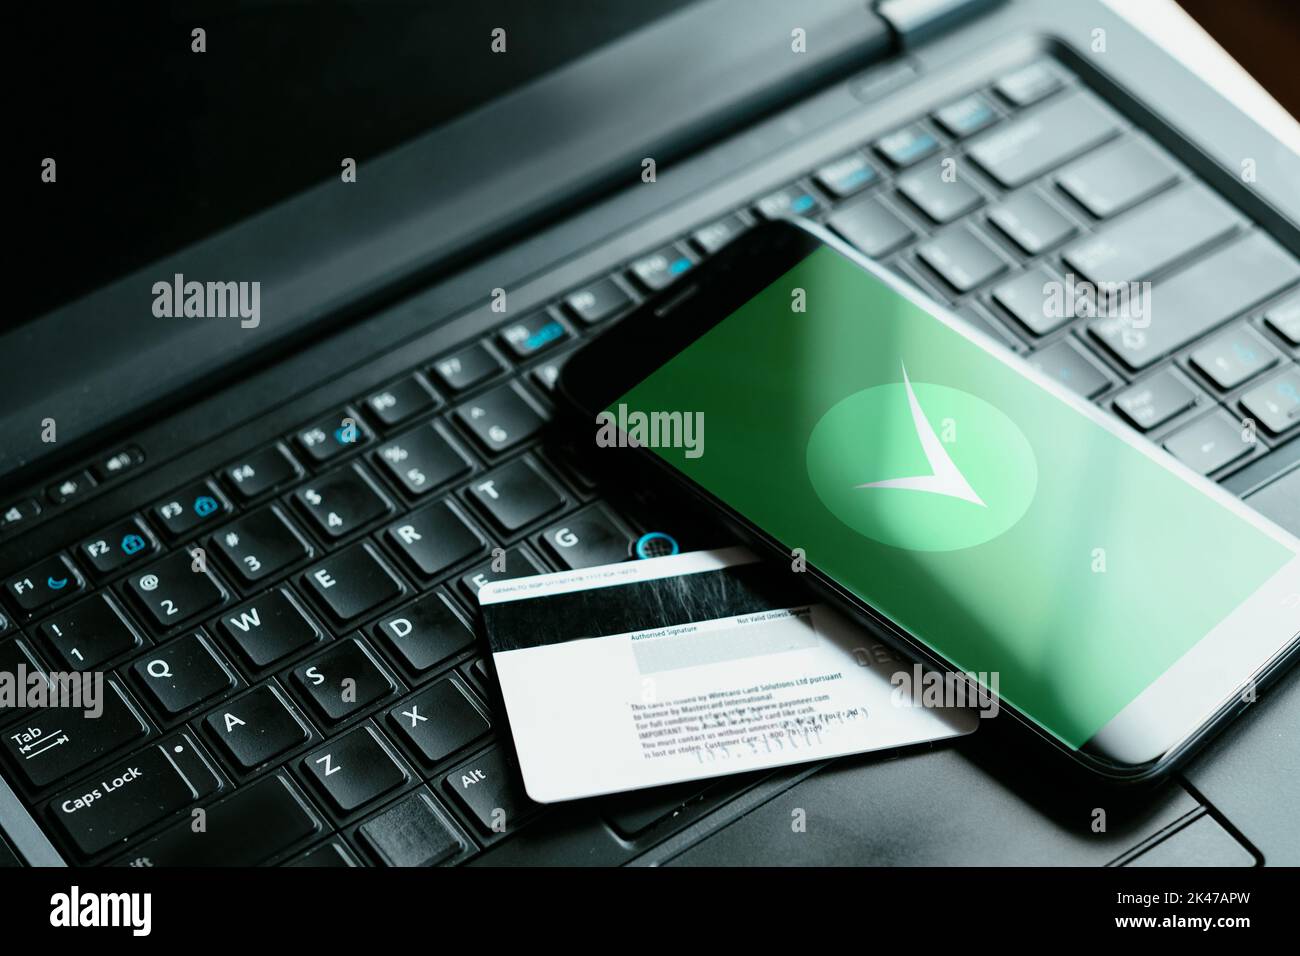 Mobile banking. Payment confirmation. Fintech business. Electronic transaction security. Credit card phone with approved status green checkmark icon o Stock Photo